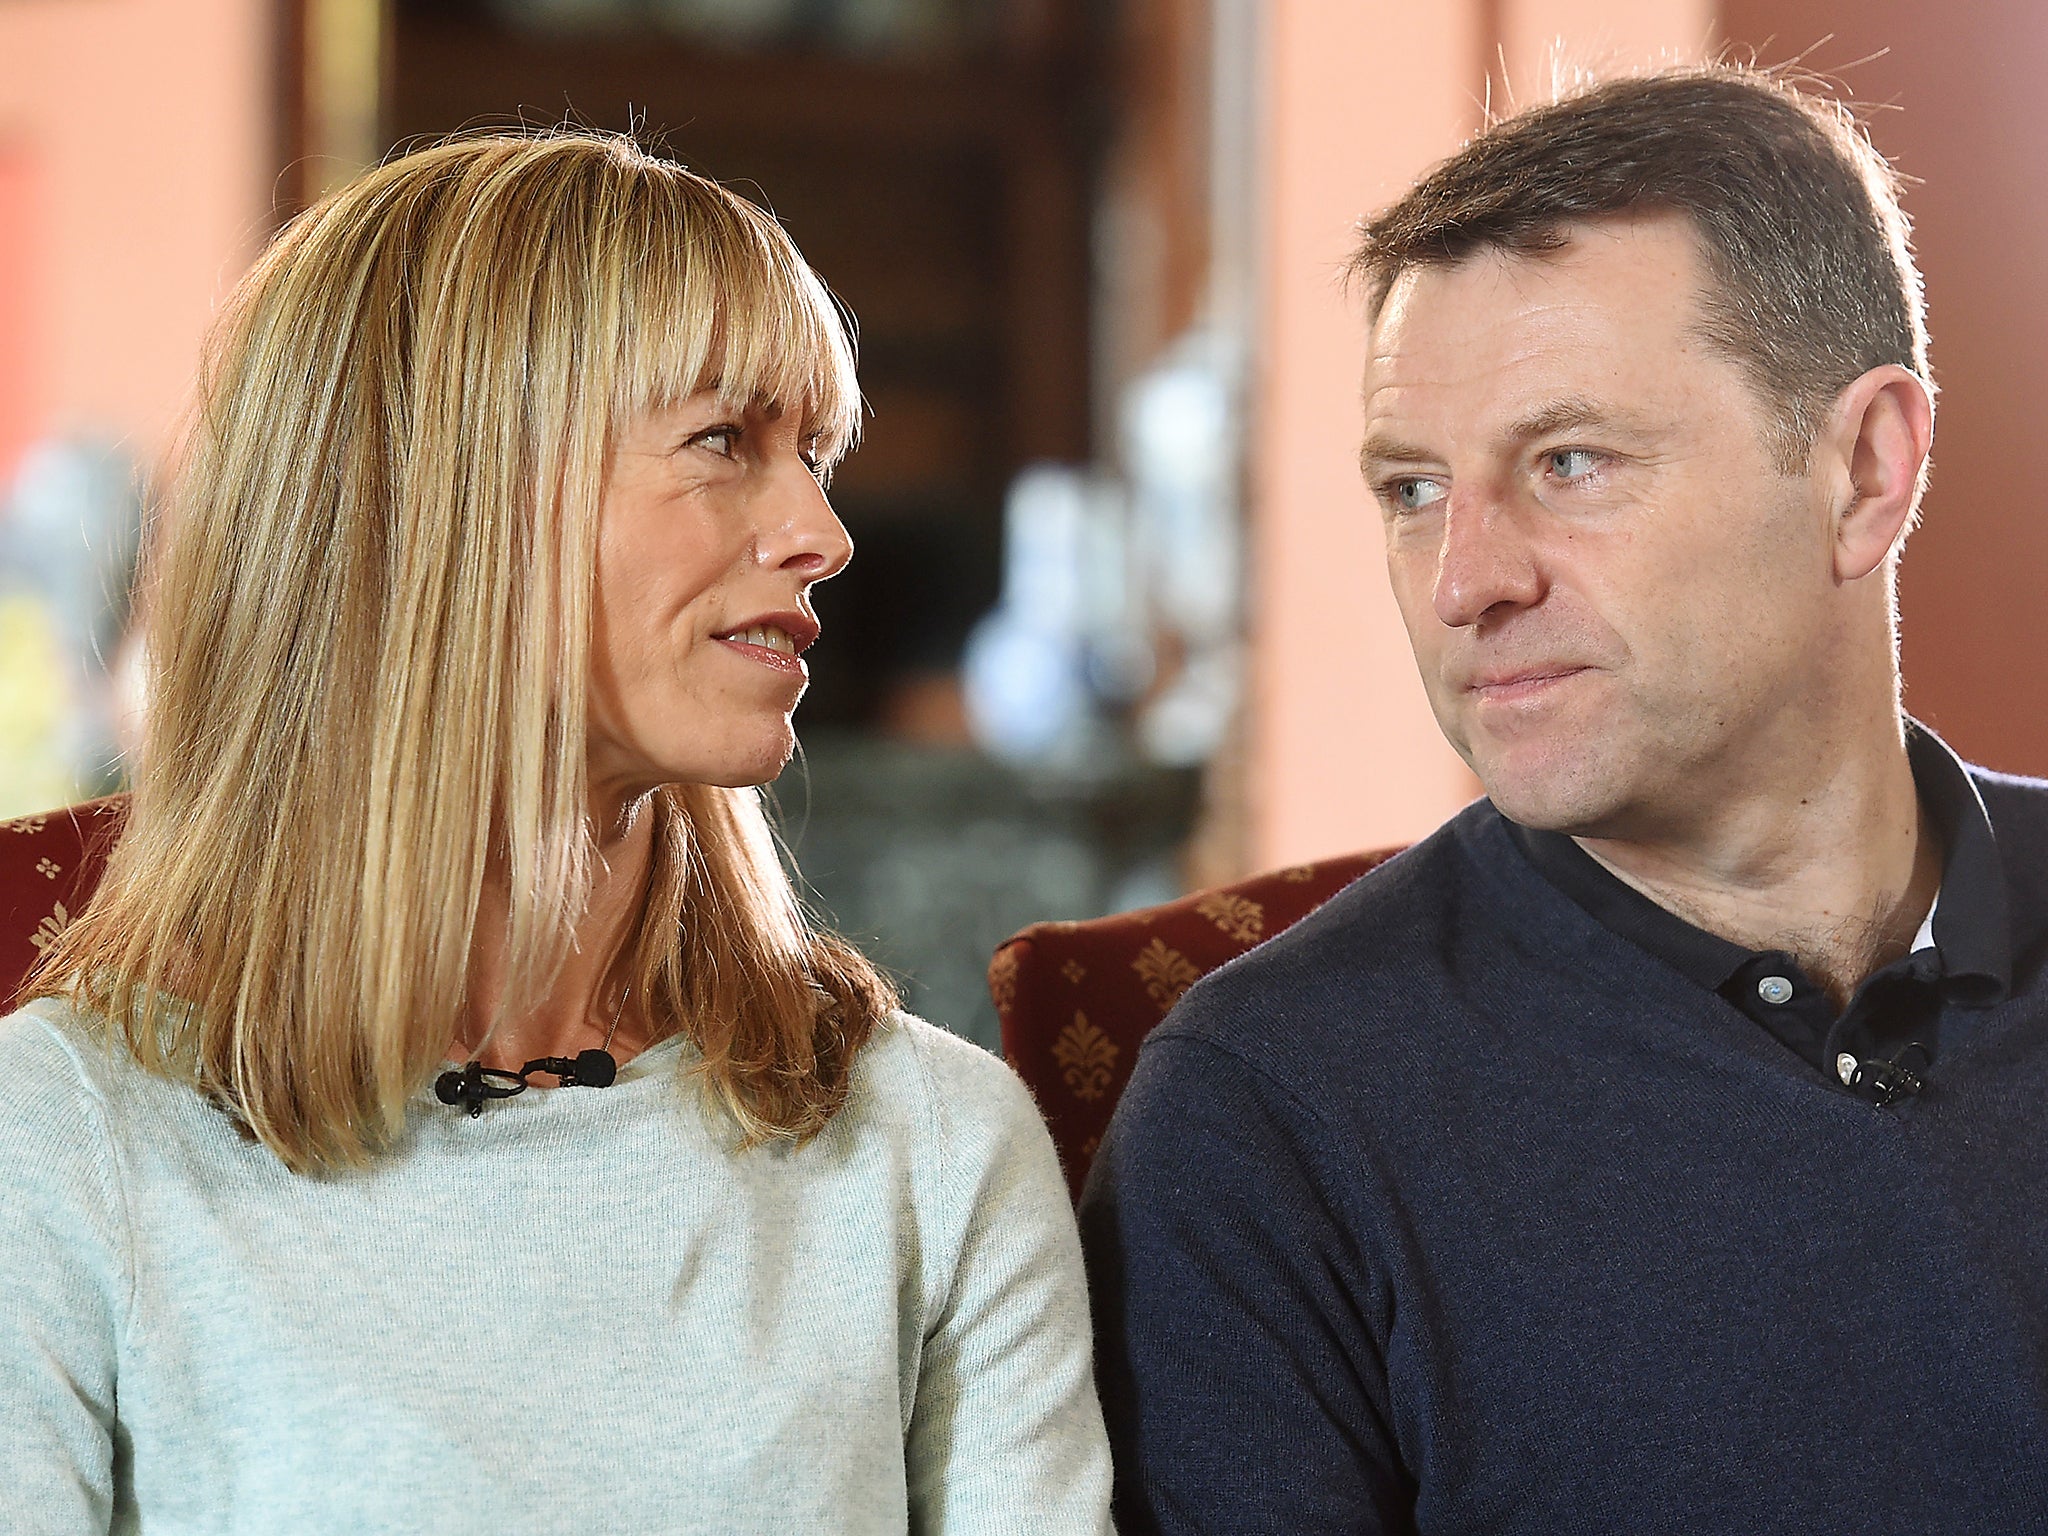 Father Daughter Abuse Porn - Madeleine McCann's parents Kate and Gerry suffer online ...